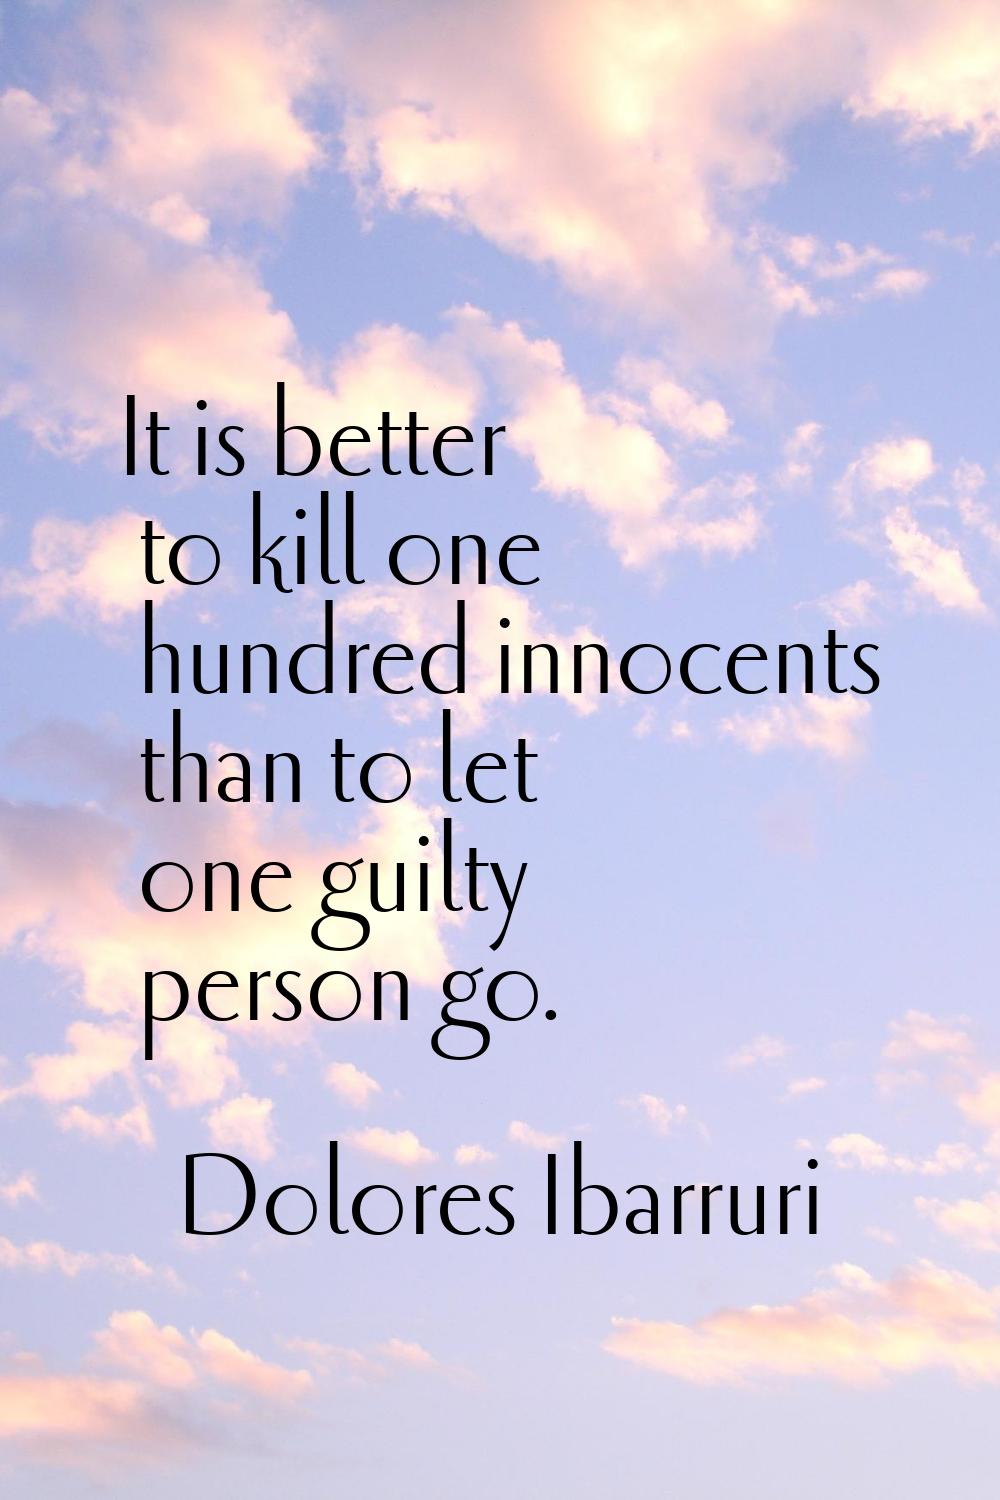 It is better to kill one hundred innocents than to let one guilty person go.